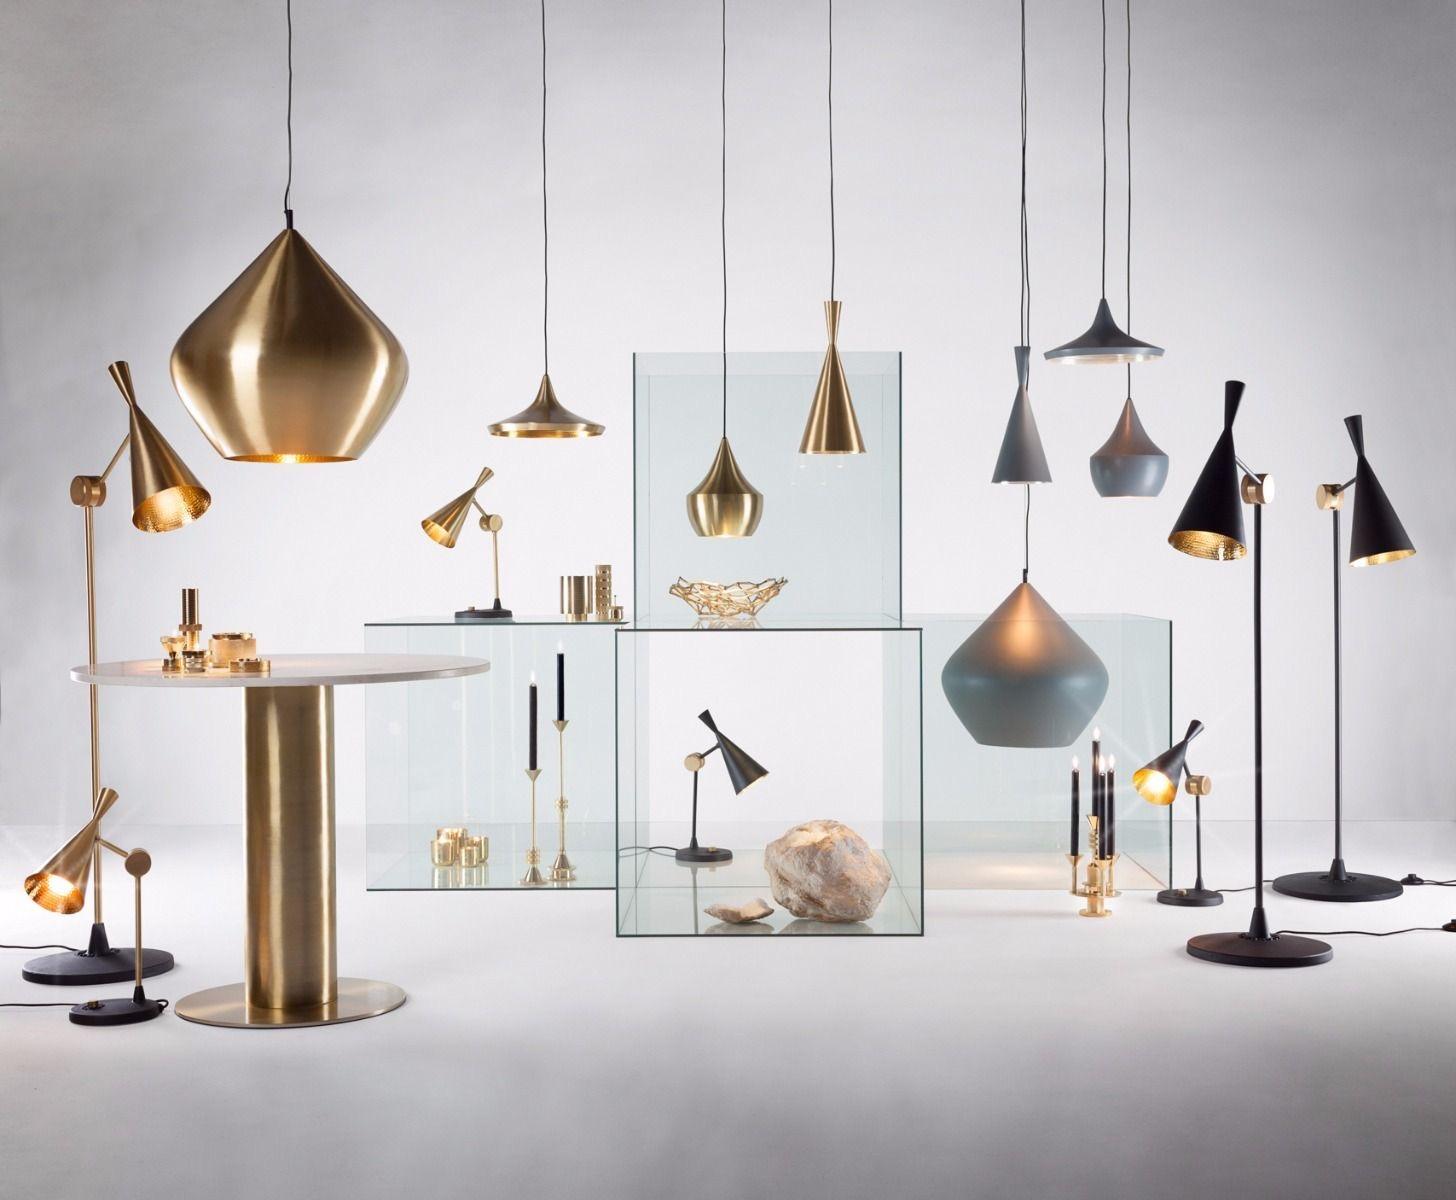 Minimal Tom Dixon beat fat gray pendant light fixture, contemporary. Gorgeous piece. Retails for 575 USD.  New in box.

The Tom Dixon beat fat pendant is part of a series of lights inspired by the handmade brass cooking pots and water vessels